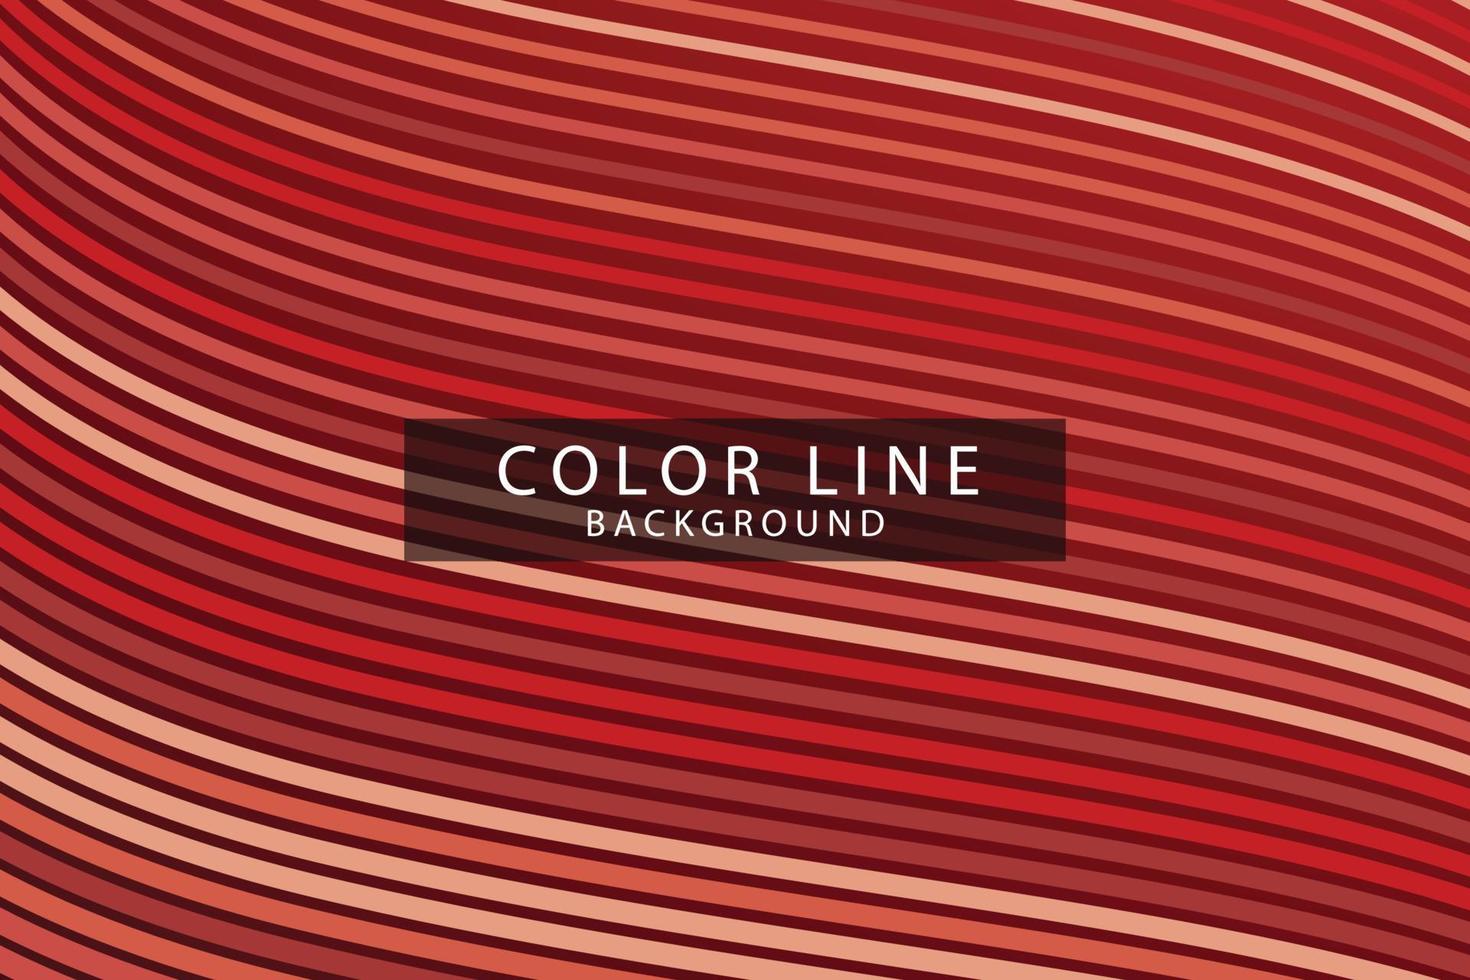 banner Wave Lines Pattern an Abstract Stripe Background, Vector